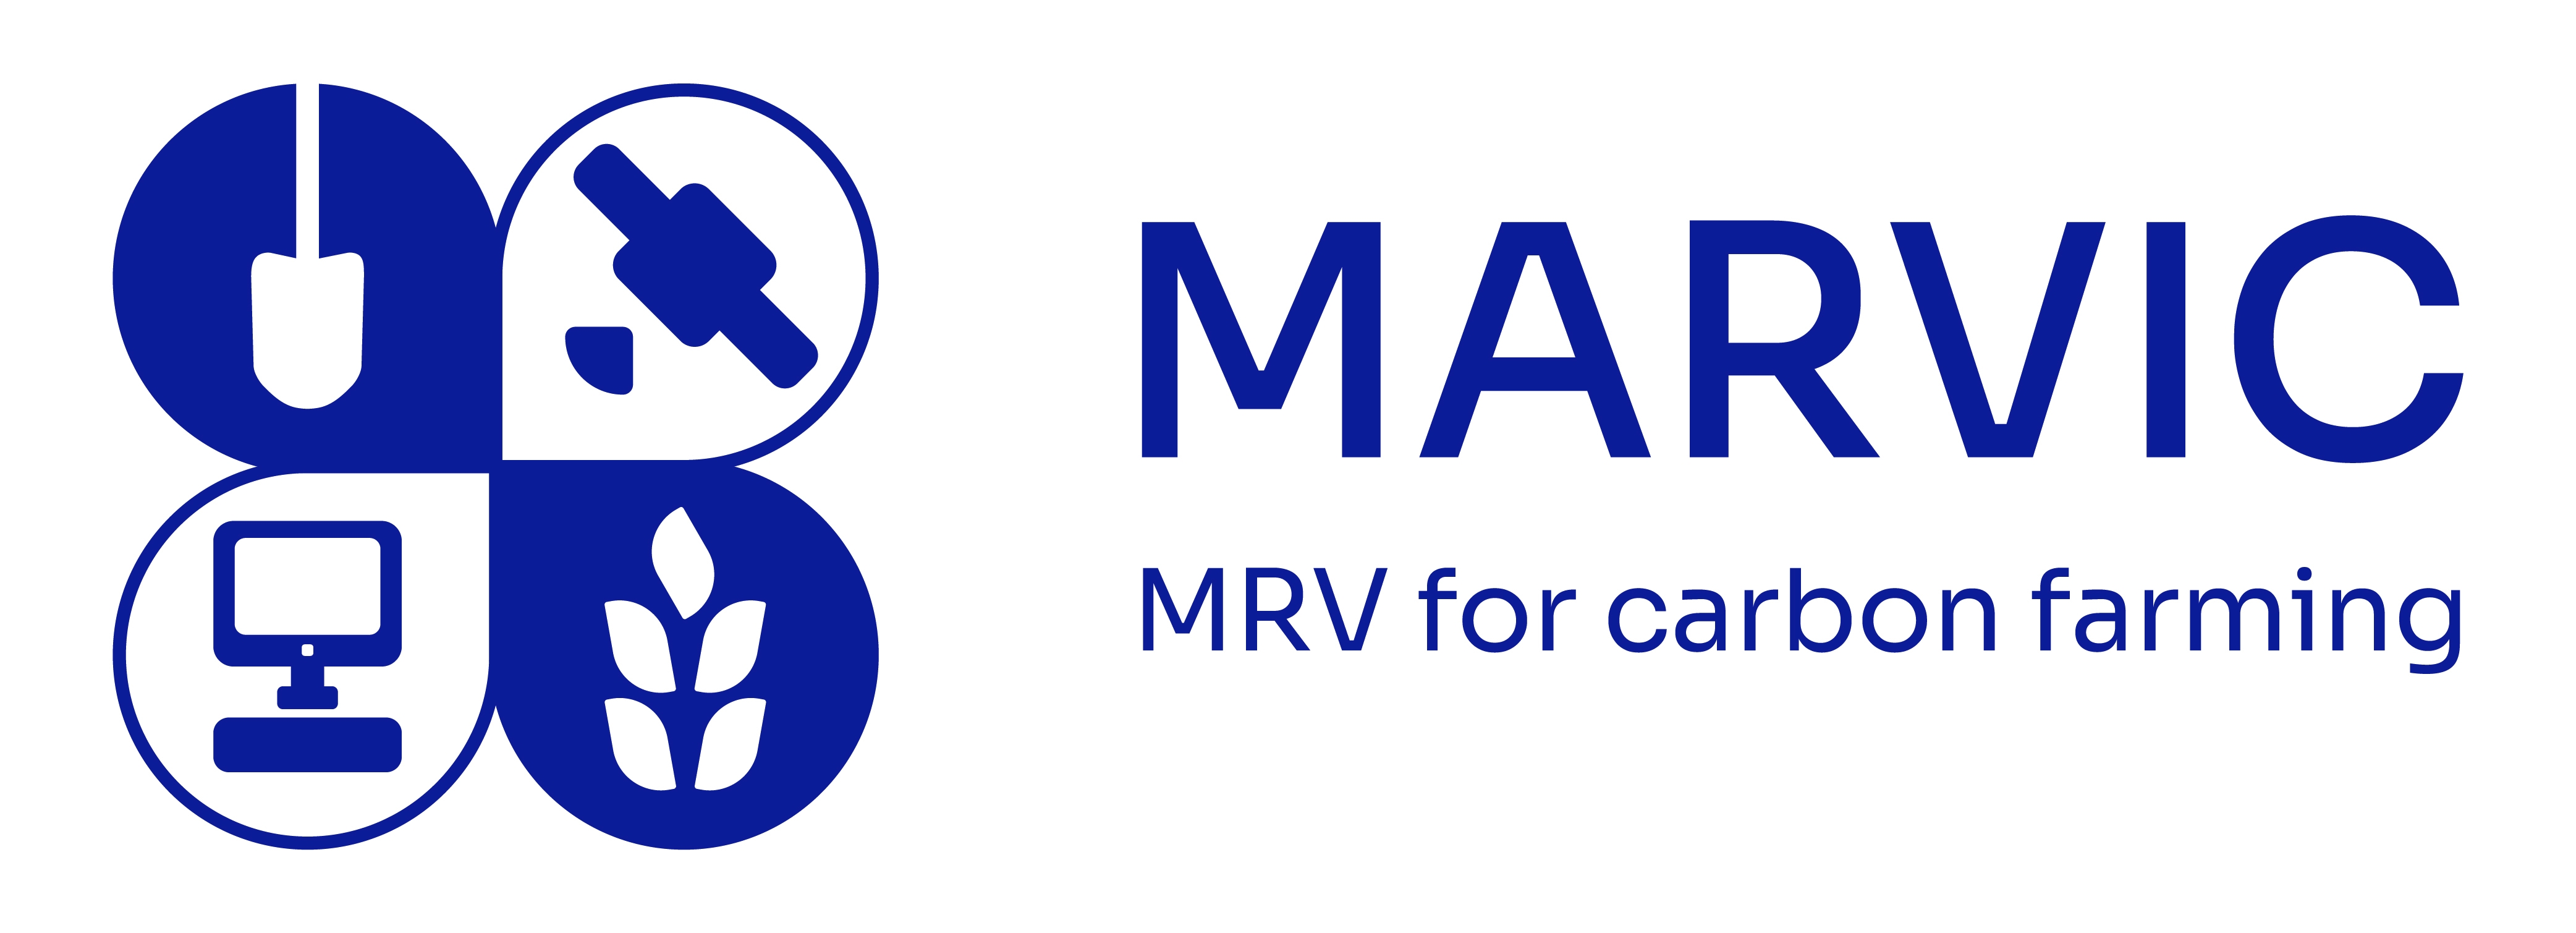 Marvic - MRV for carbon farming